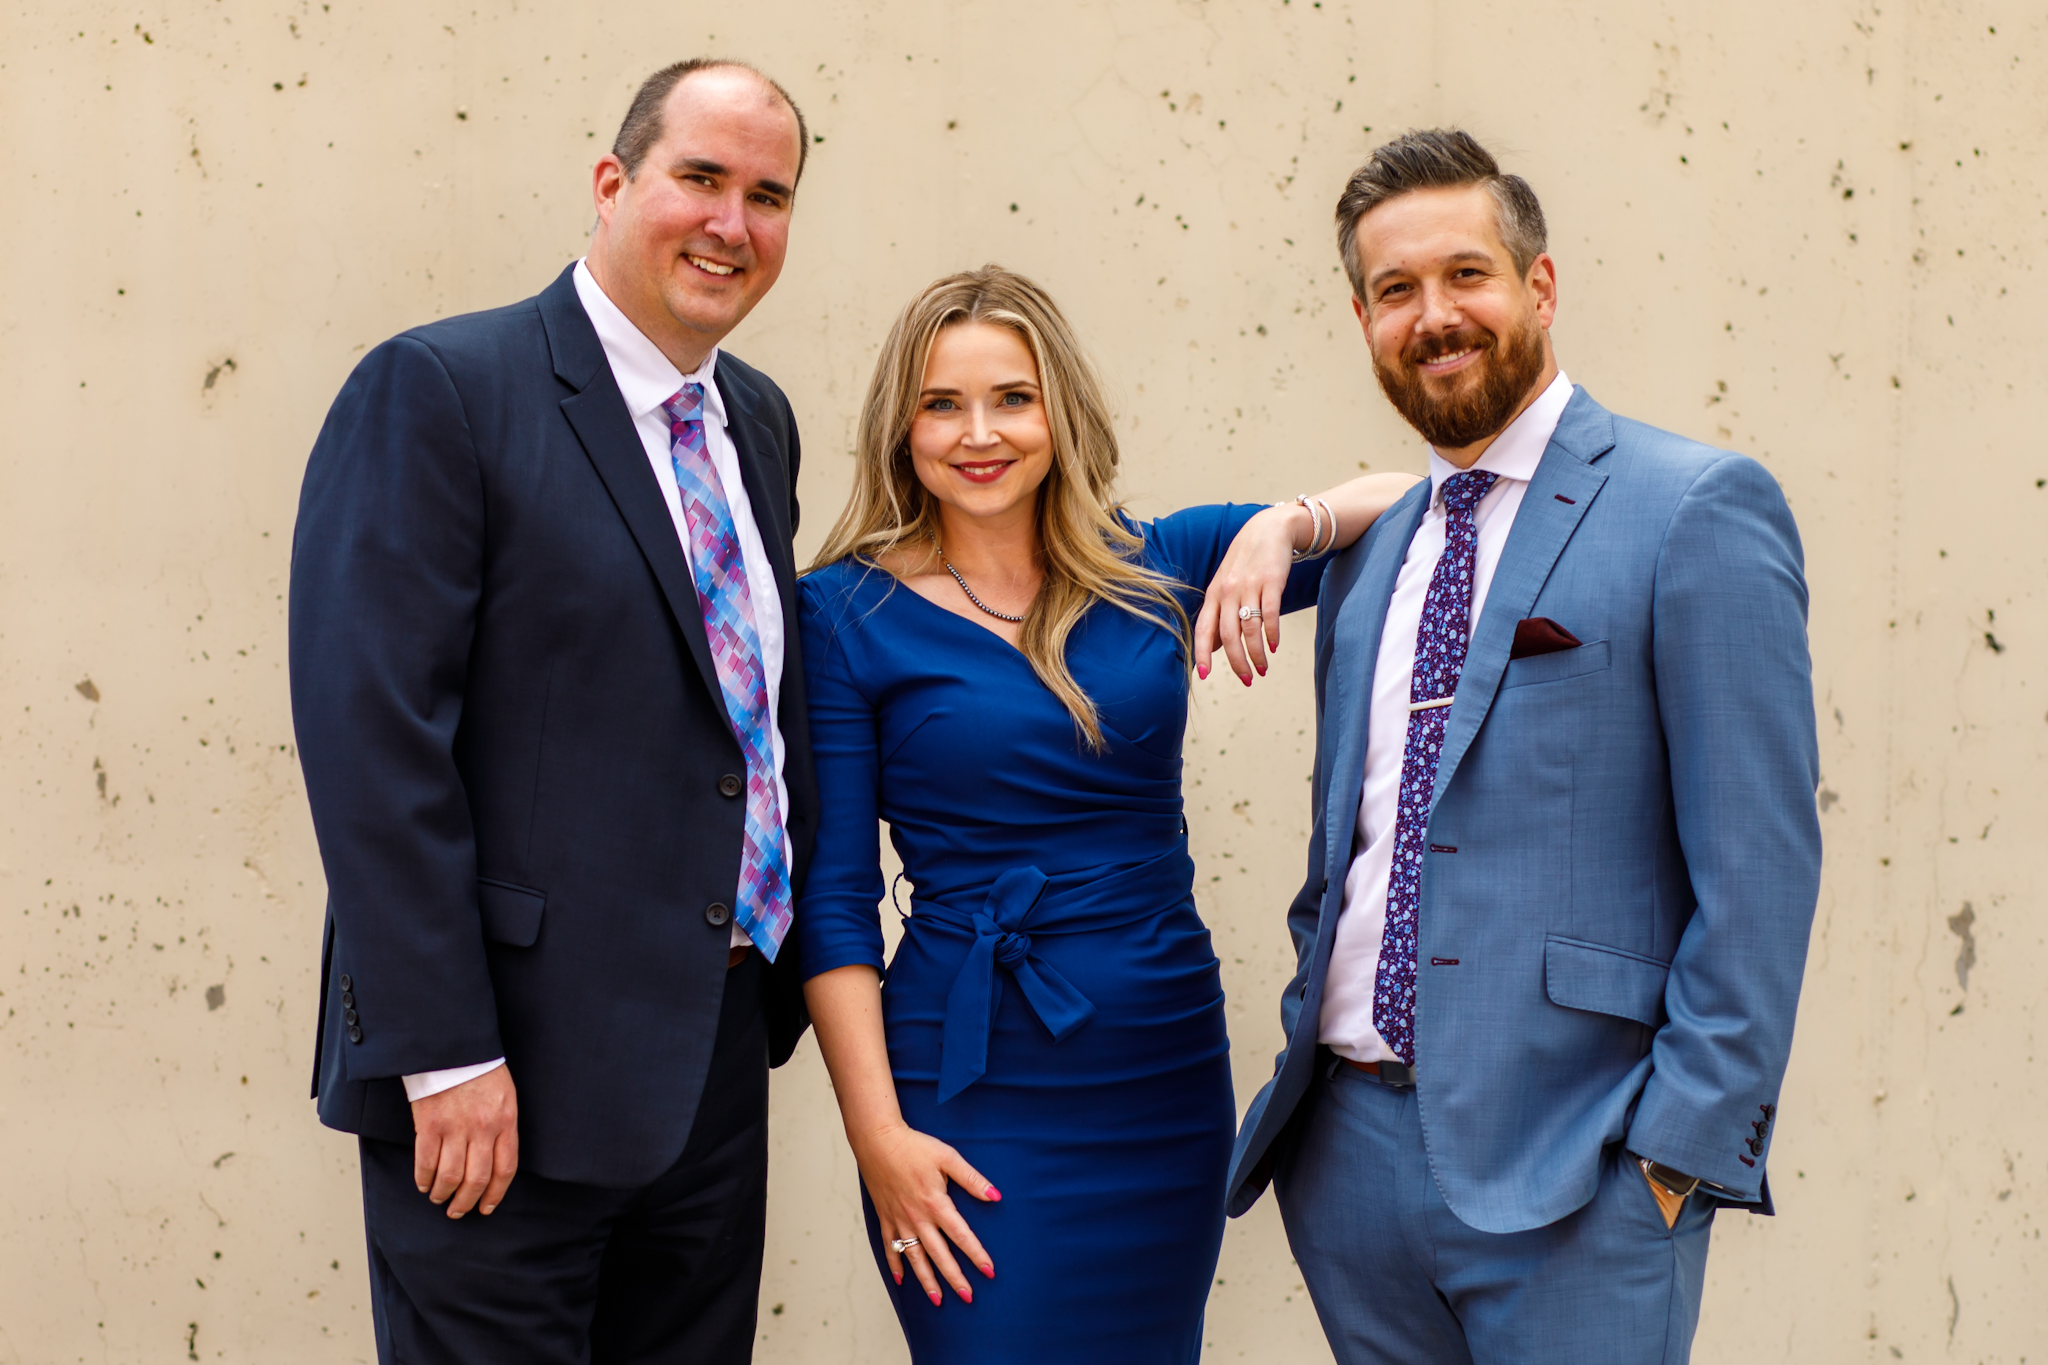 Spradlin Kennedy Legal team posing together for a photo. Our team of experienced criminal defense attorneys in Kansas City are prepared to fight aggressively for DUI, drug, violent crimes, and traffic violation charges.